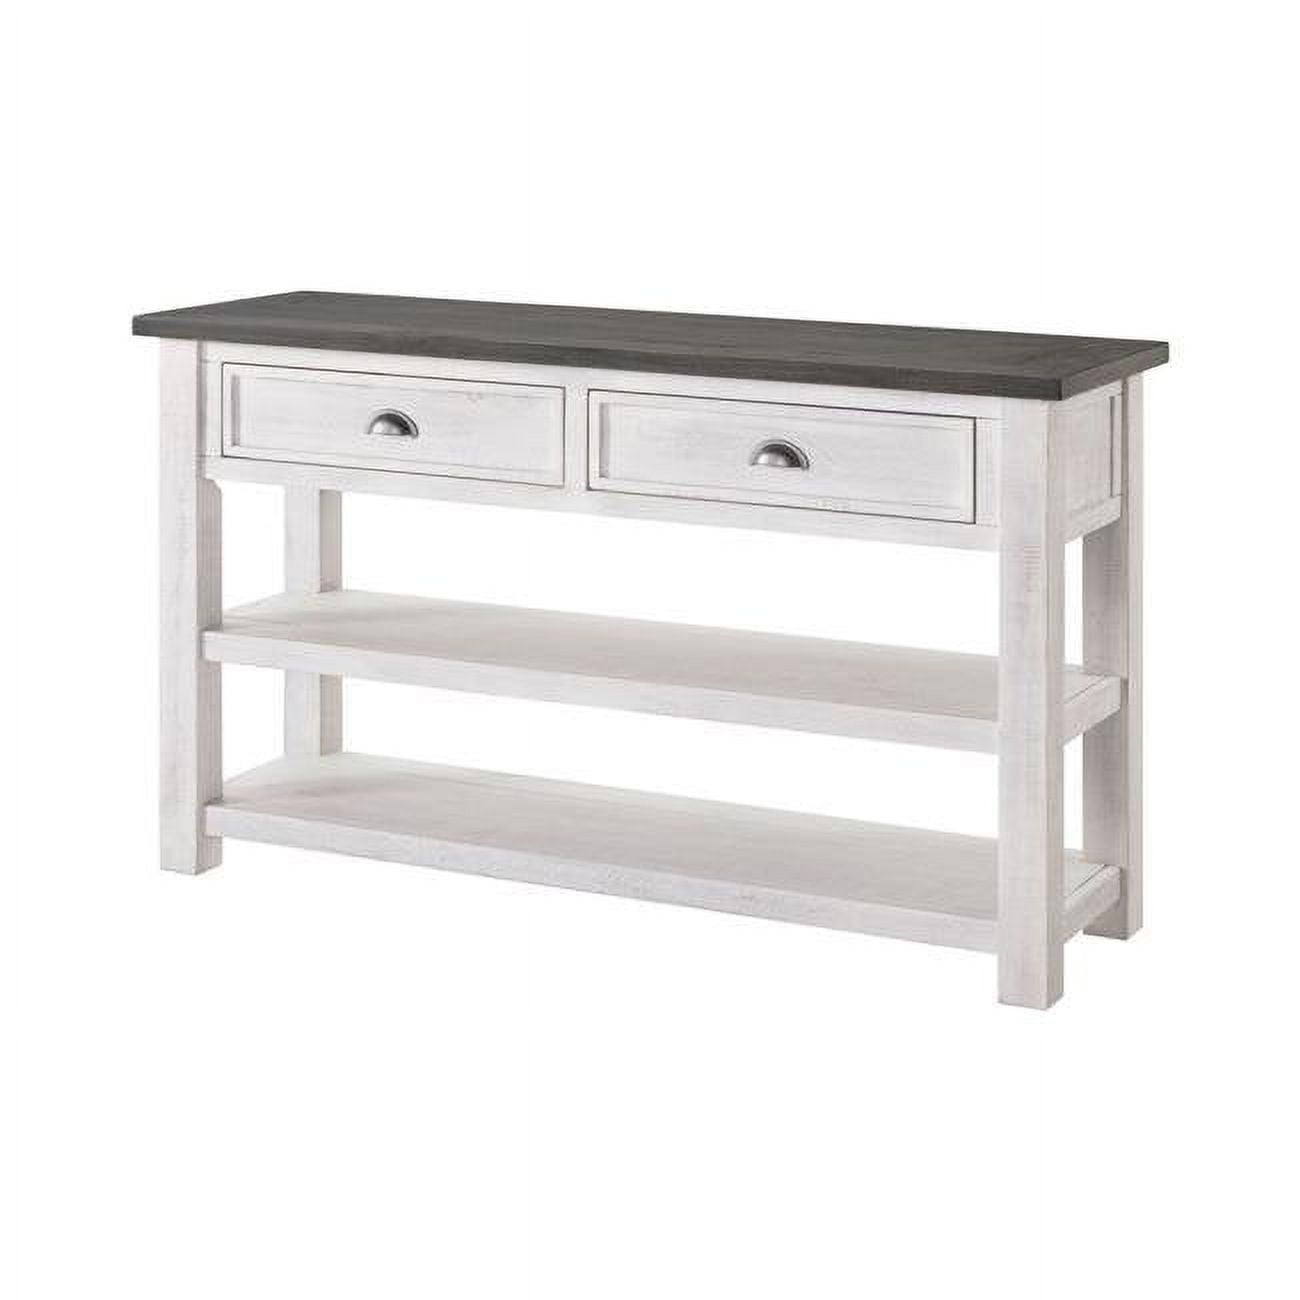 Bm205981 Coastal Rectangular Wooden Console Table With 2 Drawer, White & Gray